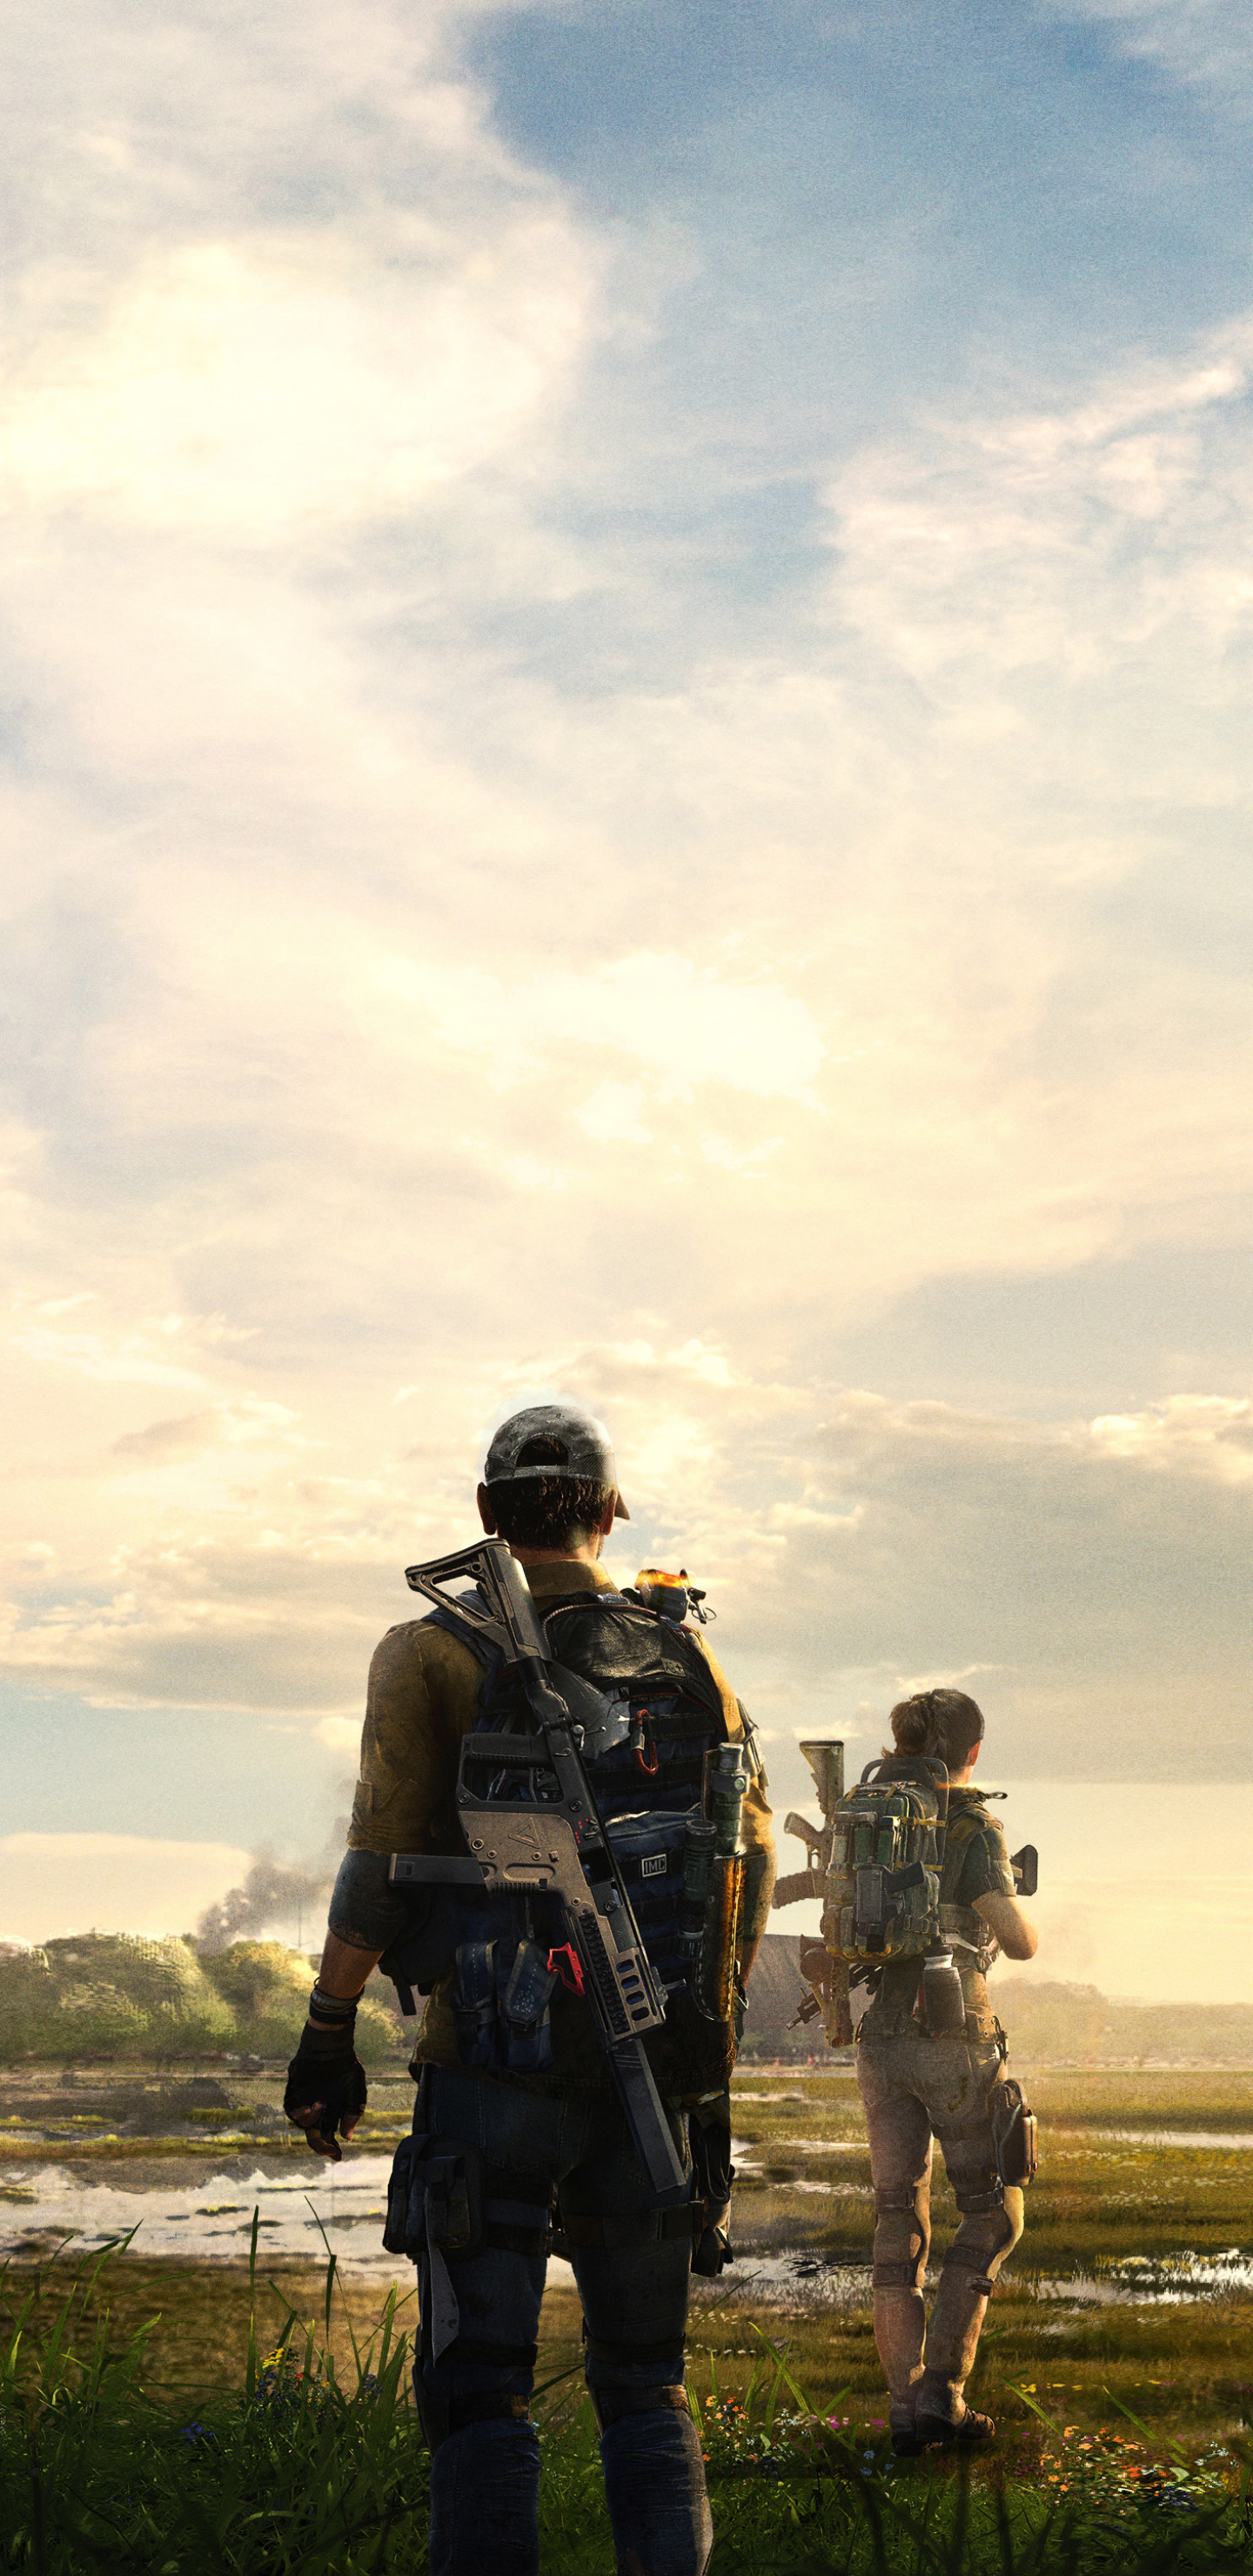 Top 13 The Division 2 Wallpapers in 4K and Full HD for Desktop